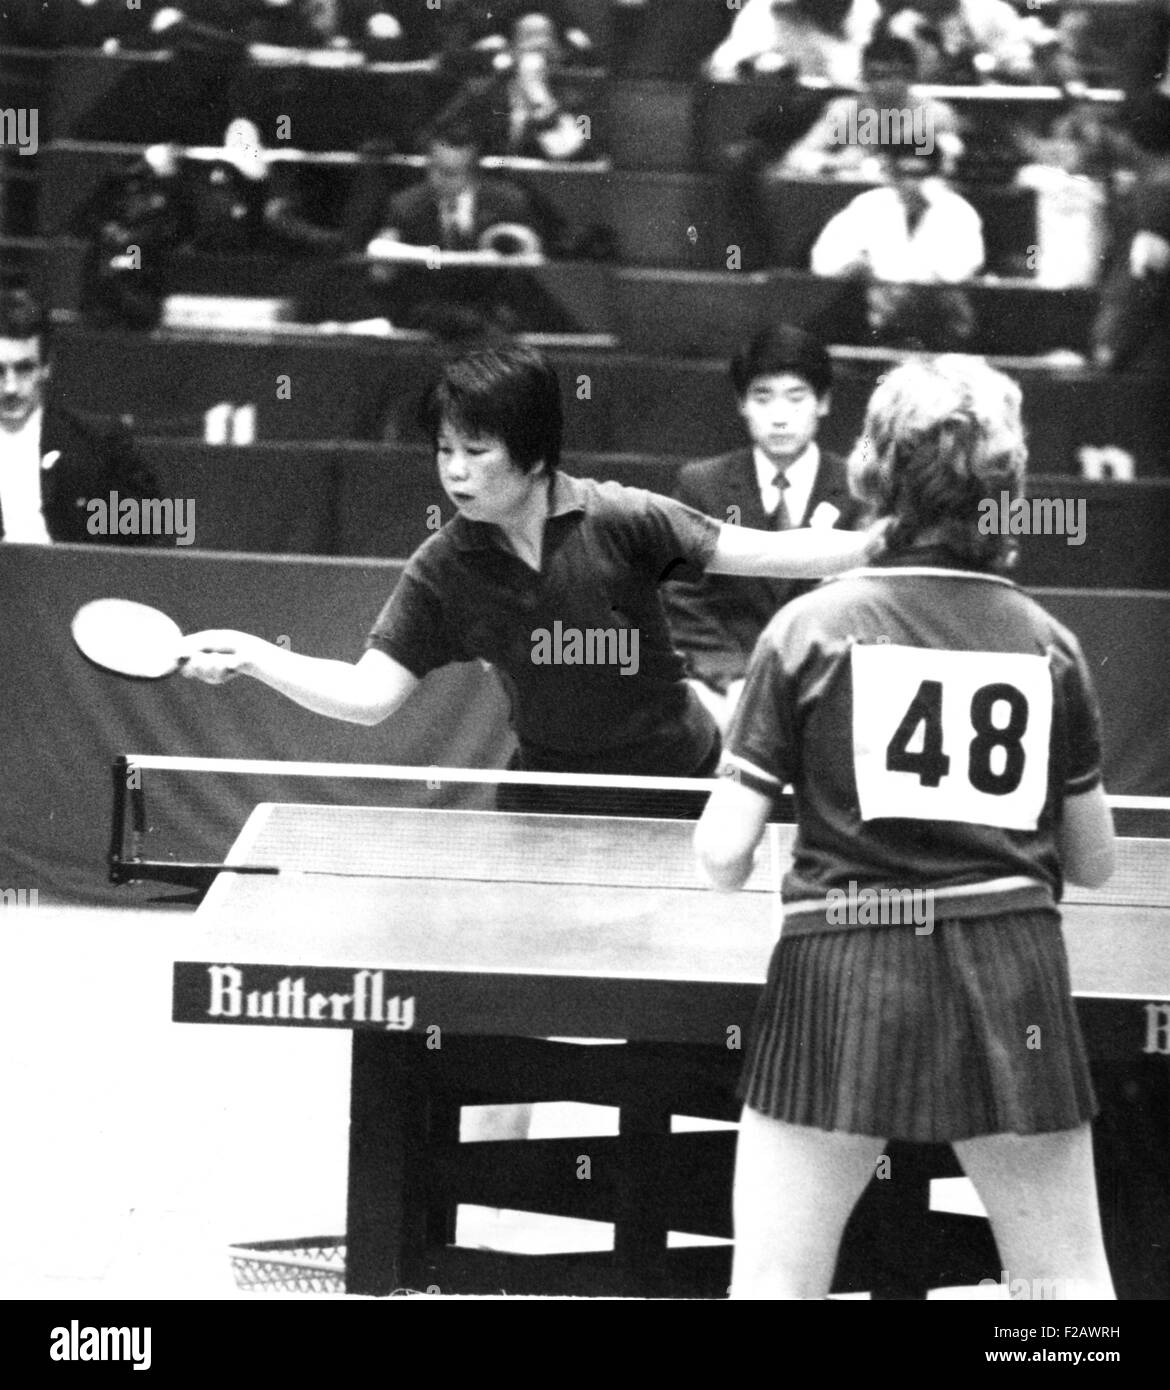 Lin Hui-Ching of Communist China at the 31st World Table Tennis Championships in Nagoya, Japan. April 7, 1971. The Chinese team Stock Photo